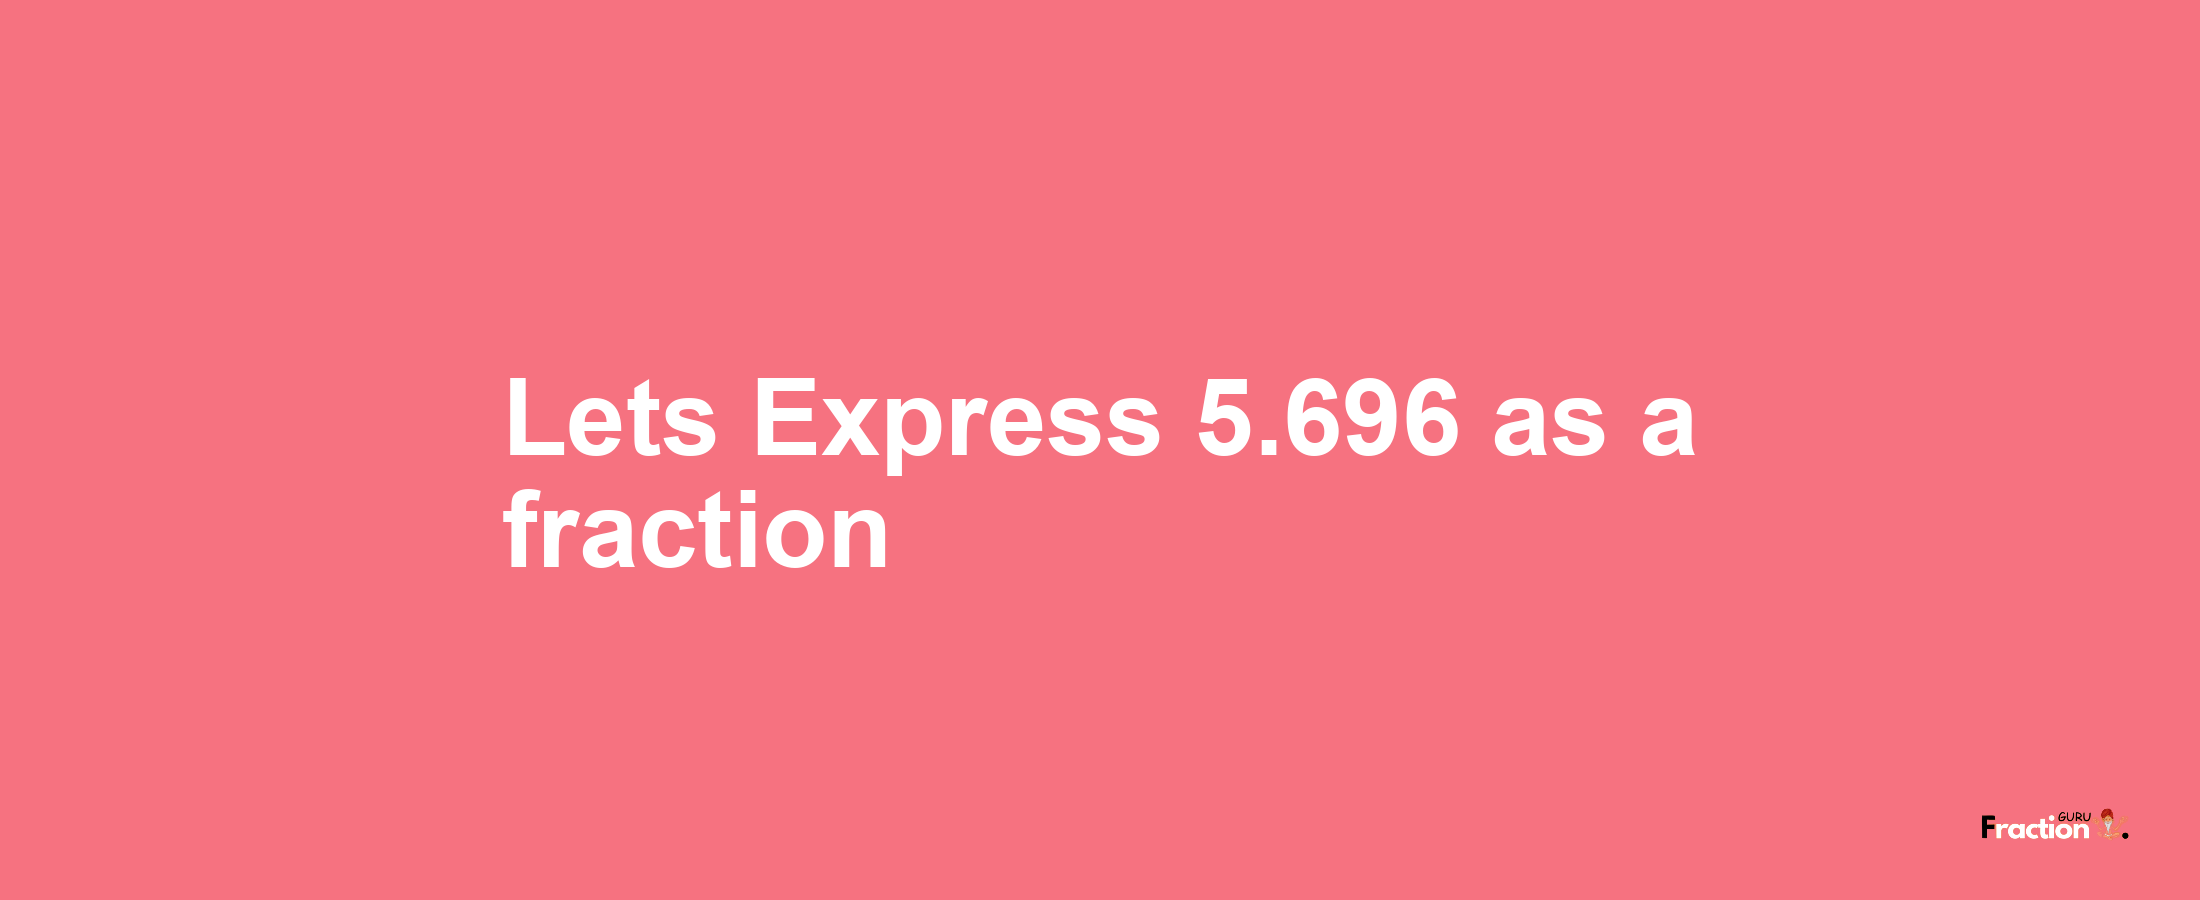 Lets Express 5.696 as afraction